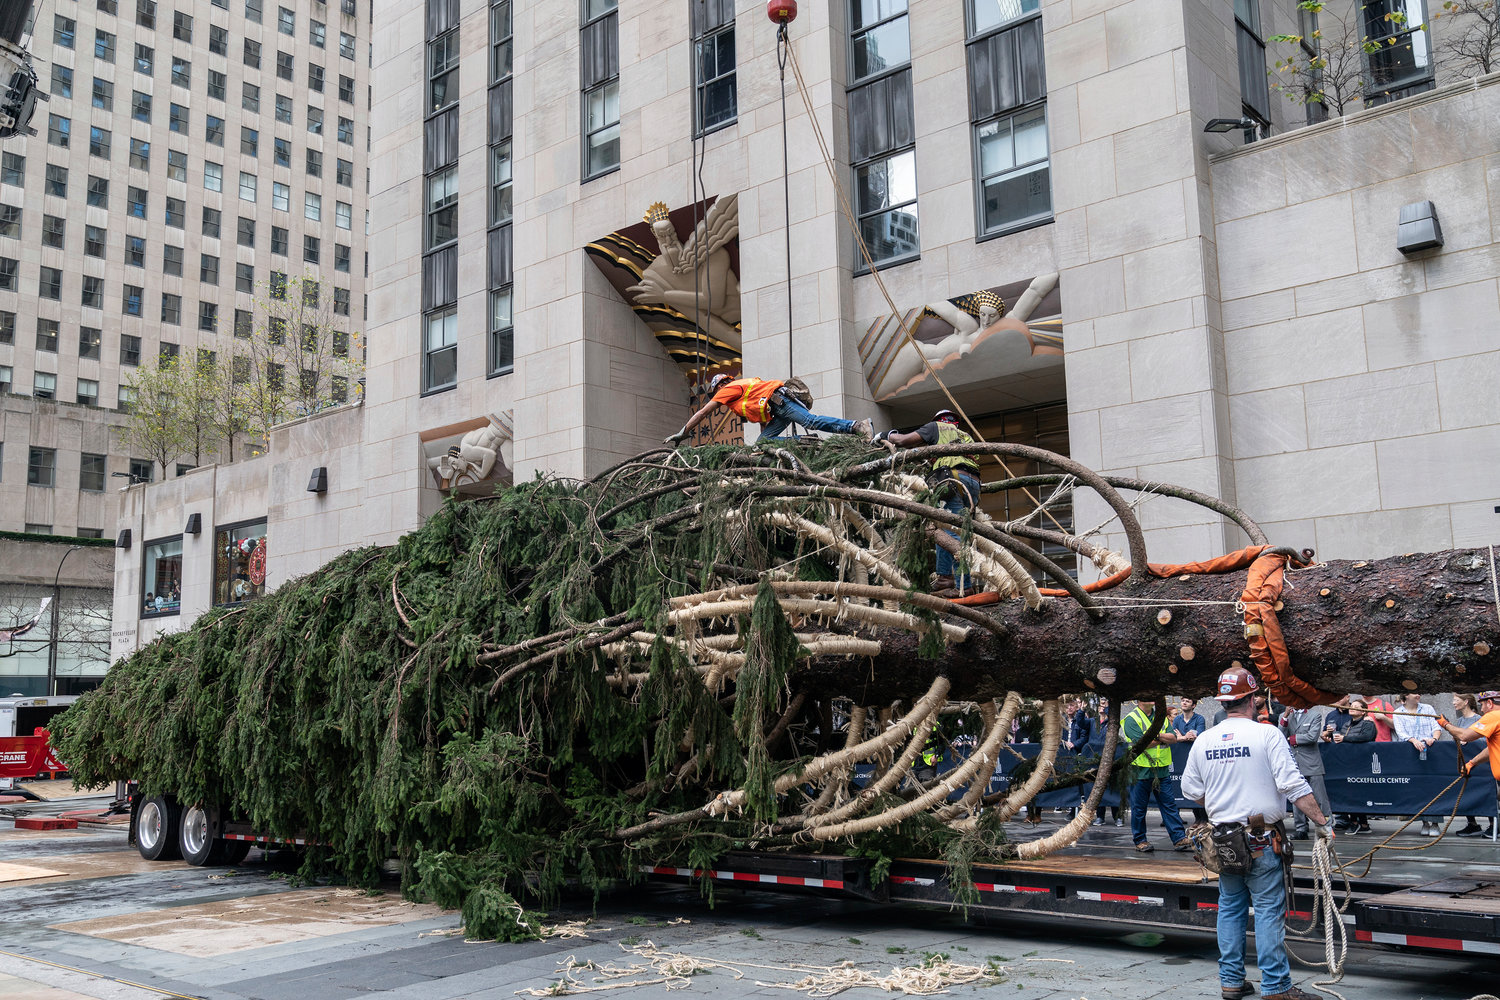 Workers and an 82-foot Norway Spruce at Rockefeller Center earlier this month.